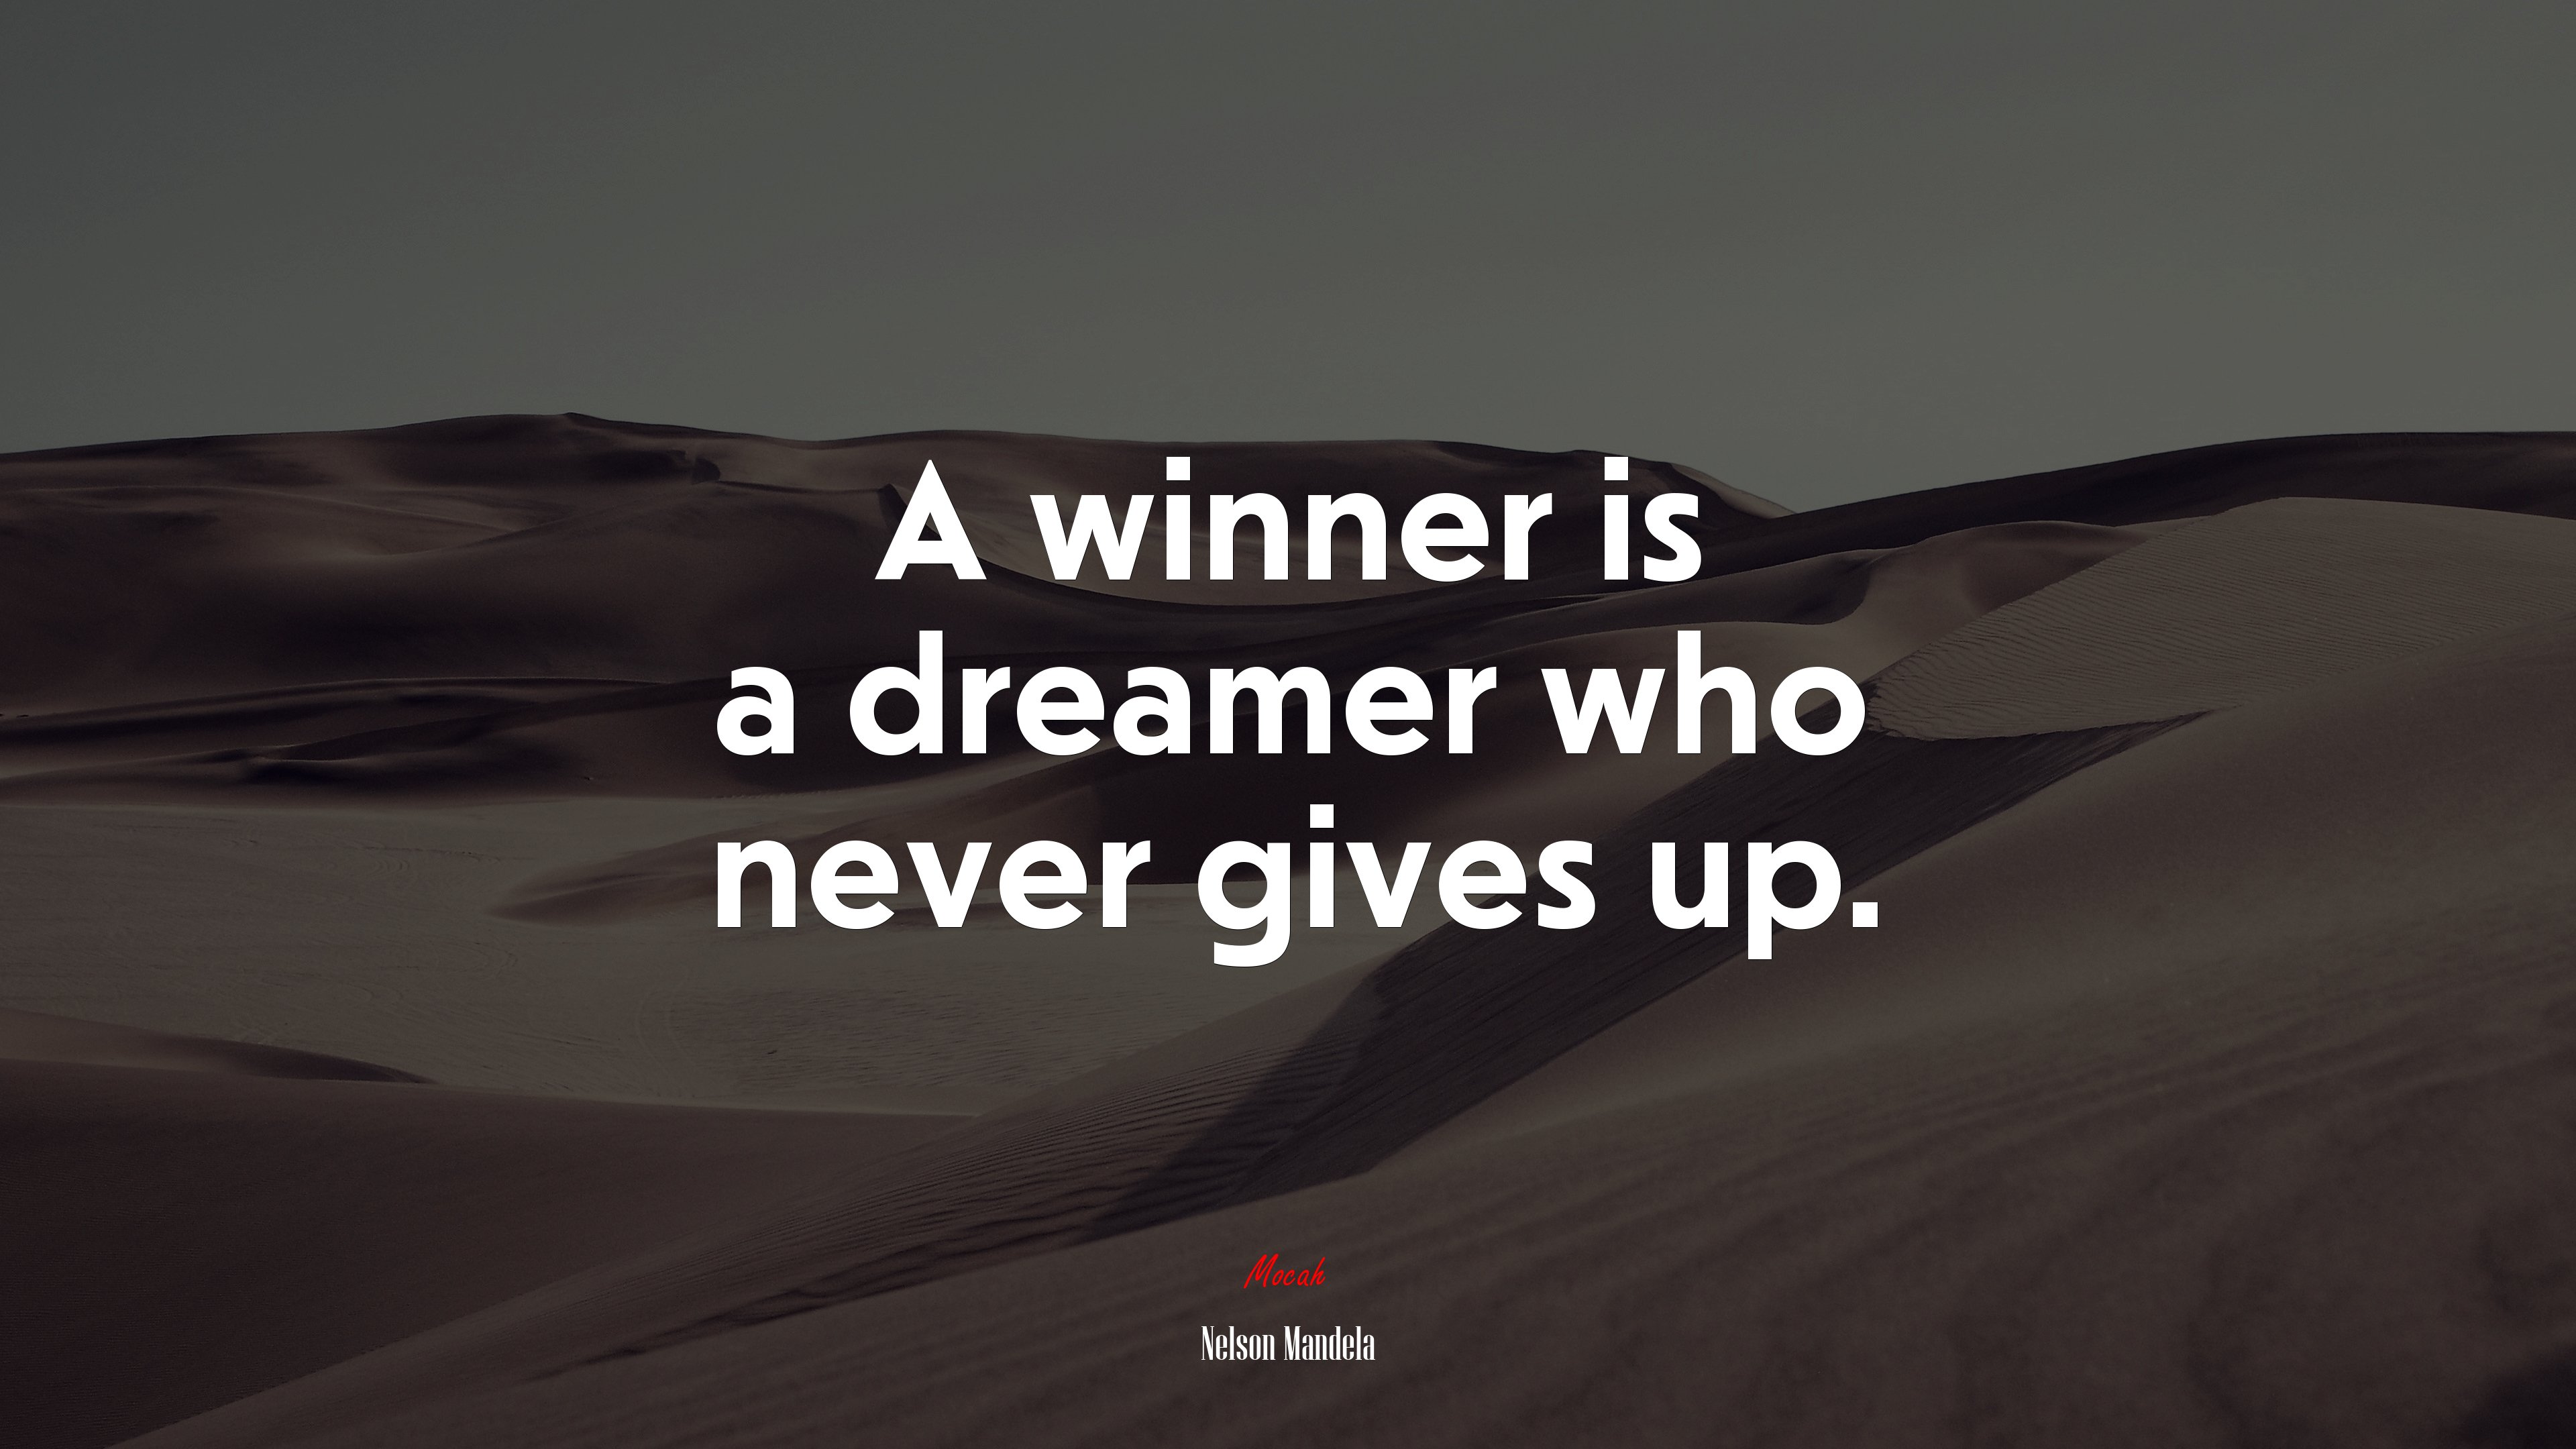 A winner is a dreamer who never gives up. Nelson Mandela quote Gallery HD Wallpaper